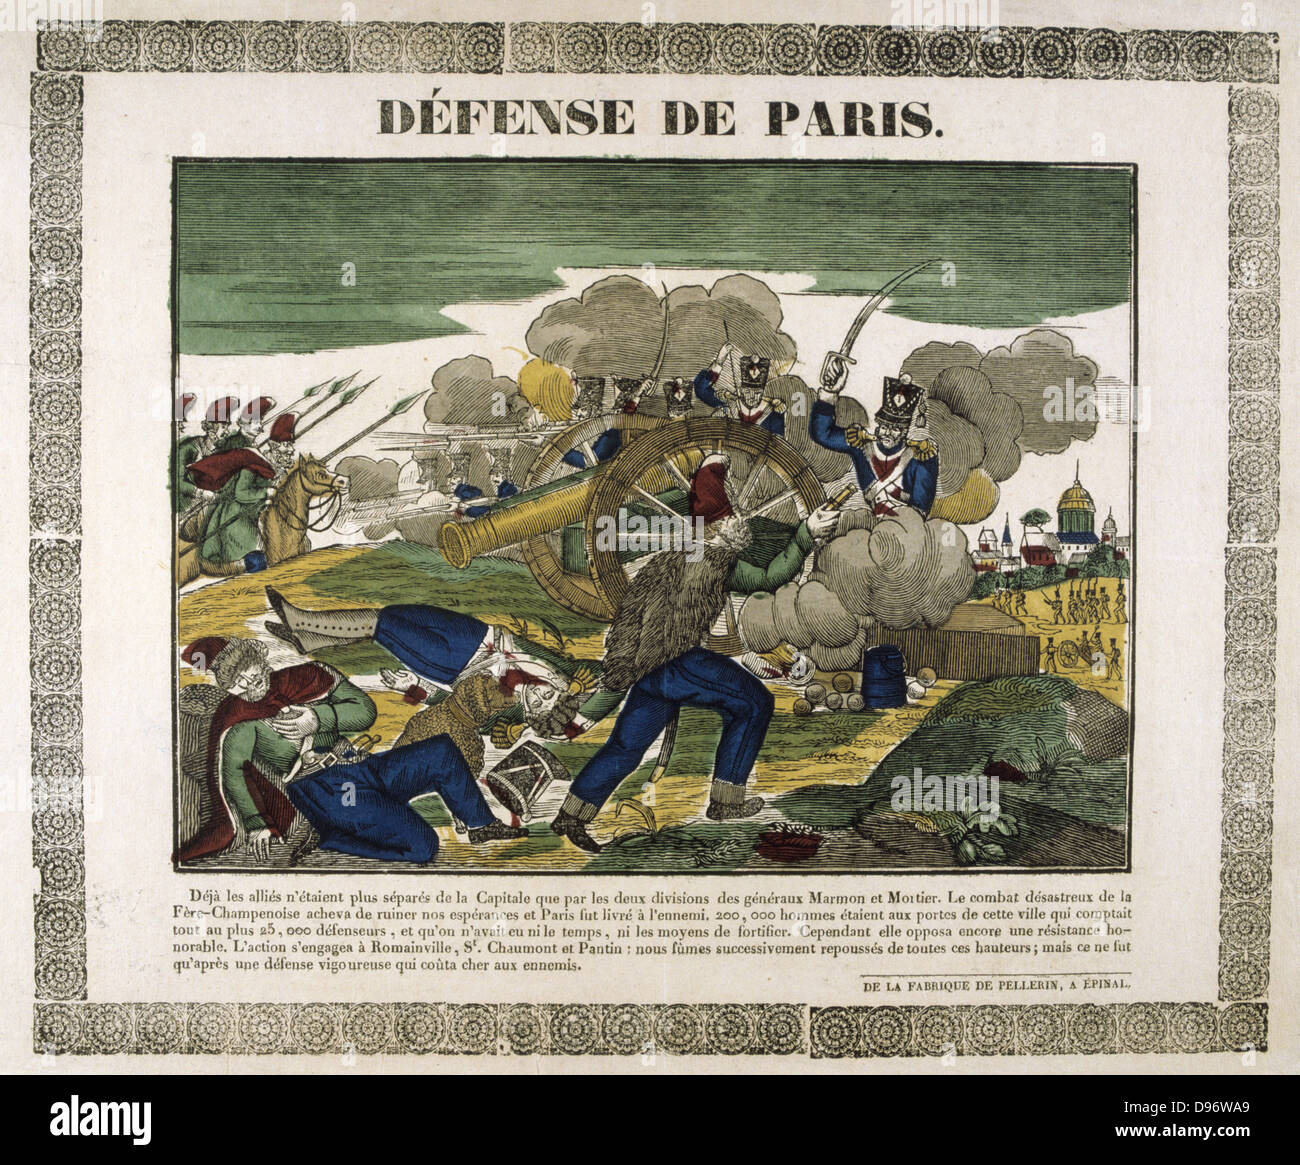 The Defence of Paris, 30 March 1814. The French defending Paris against Russian, Austrian and Prussian forces. Popular French hand-coloured woodcut. Stock Photo